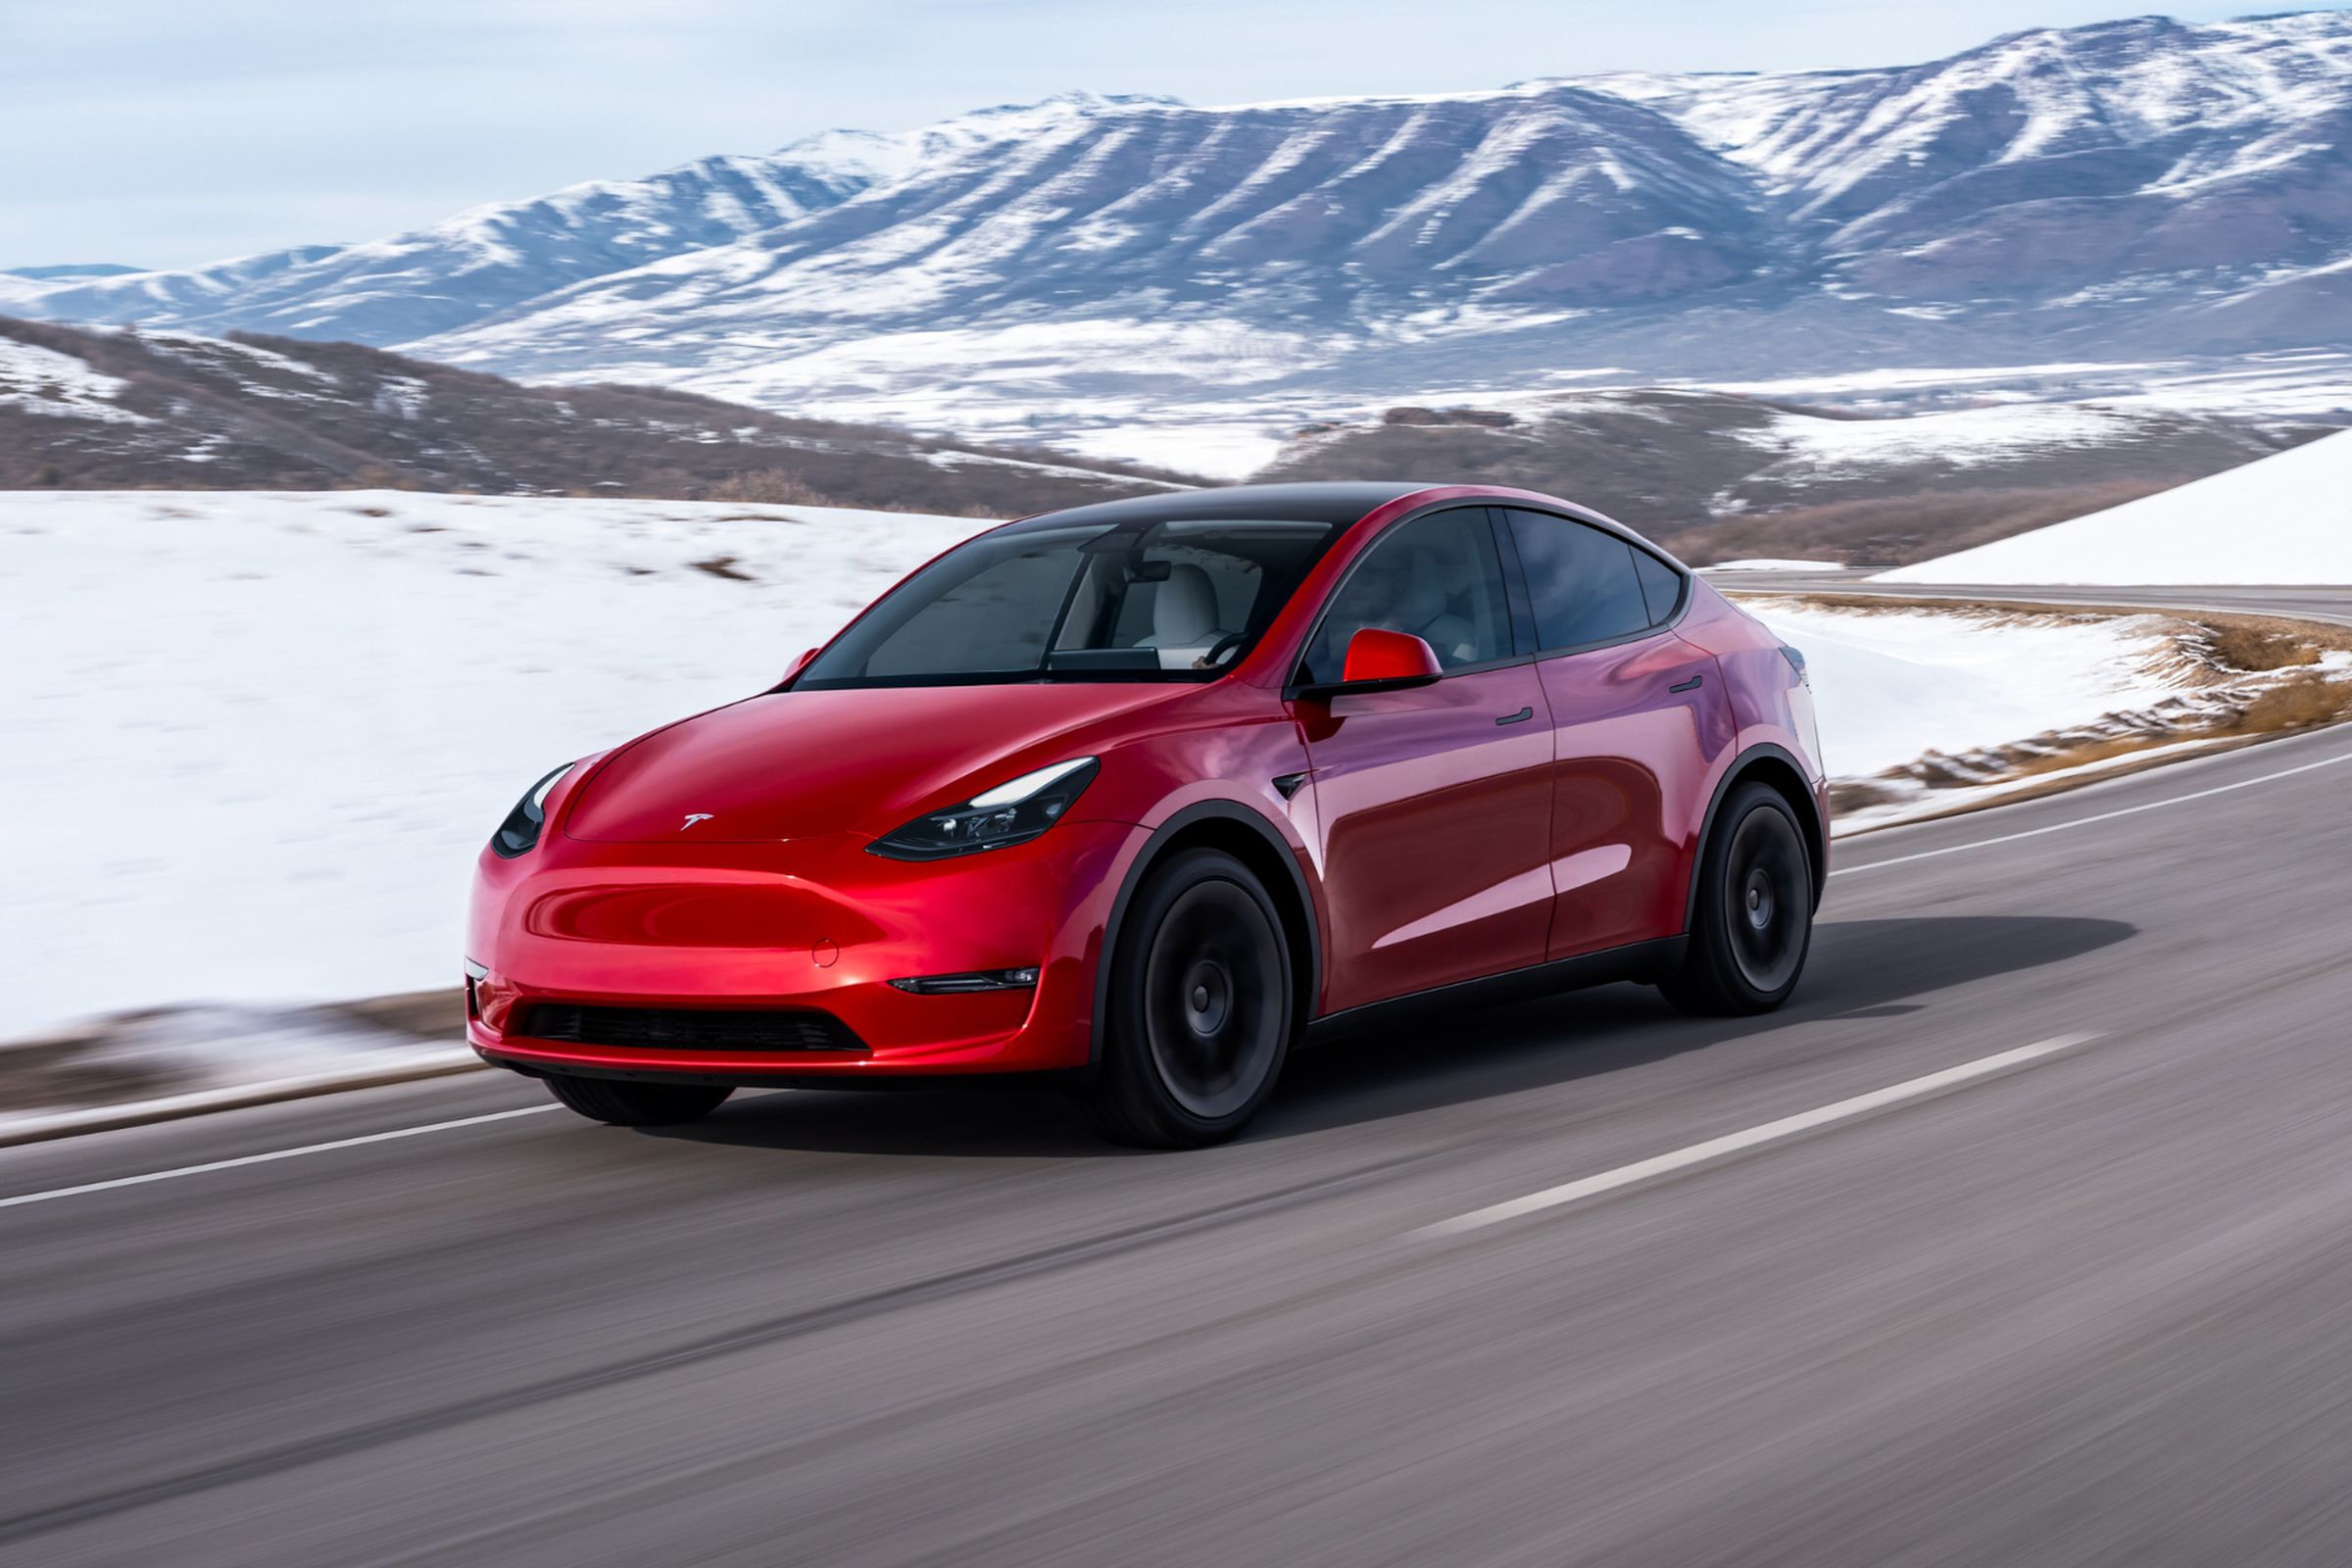 A red Tesla Model Y driving through a snowy, mountainous landscape.